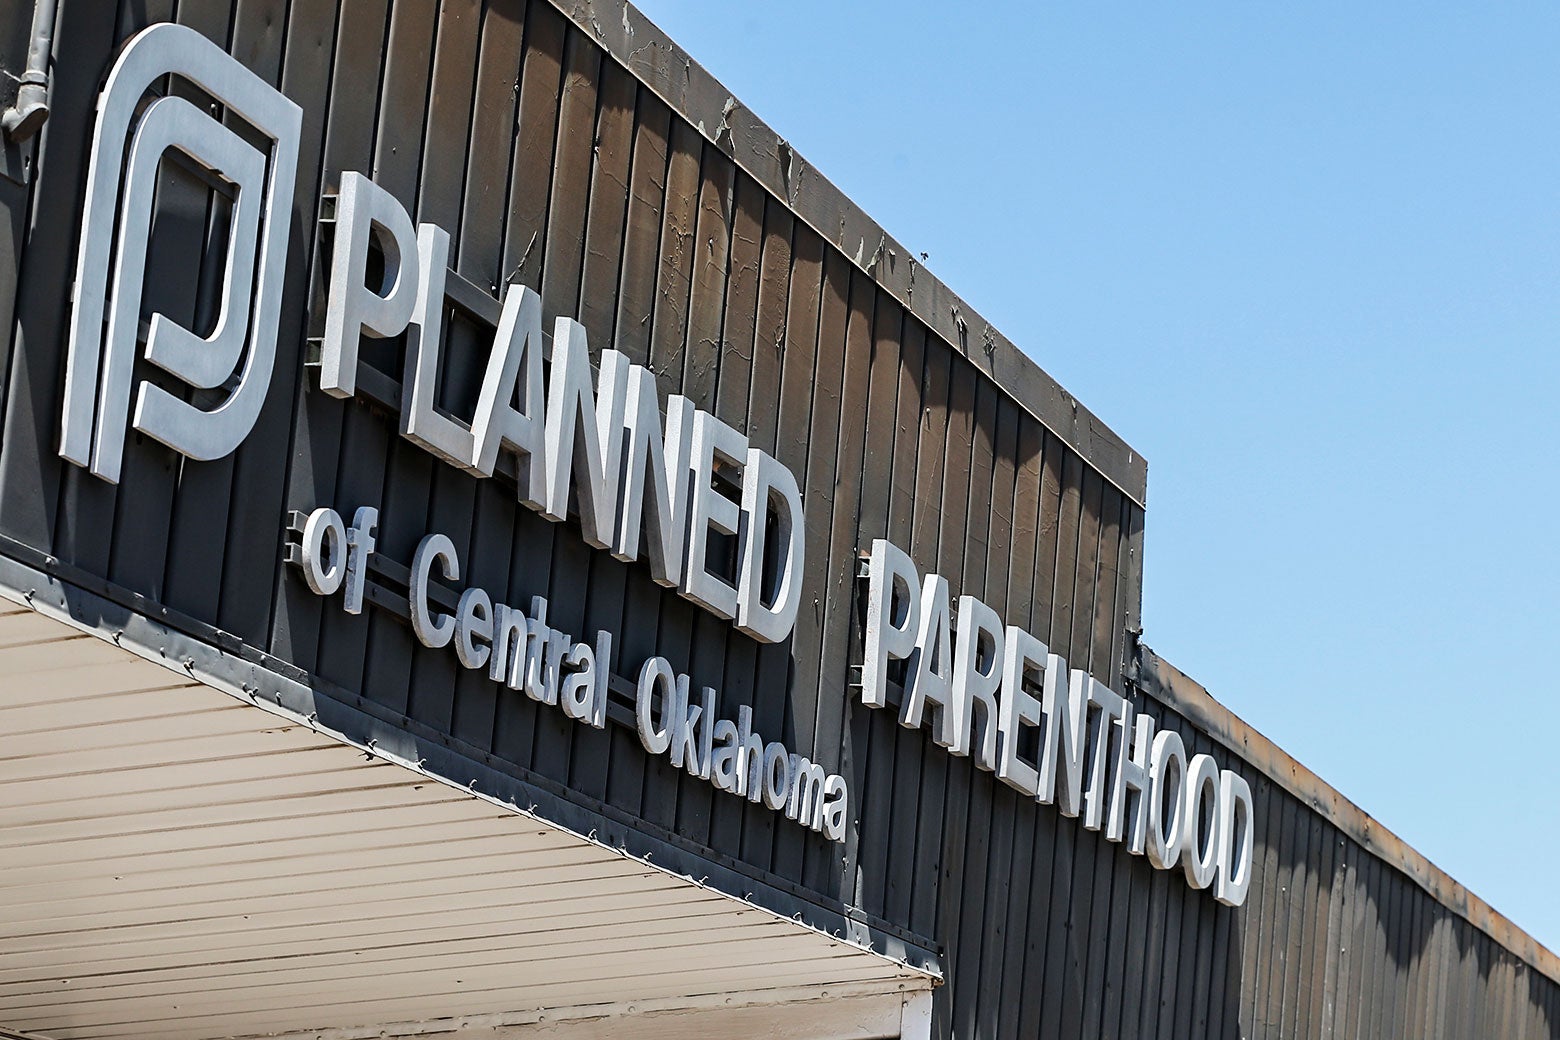 Facade of Planned Parenthood of Central Oklahoma building